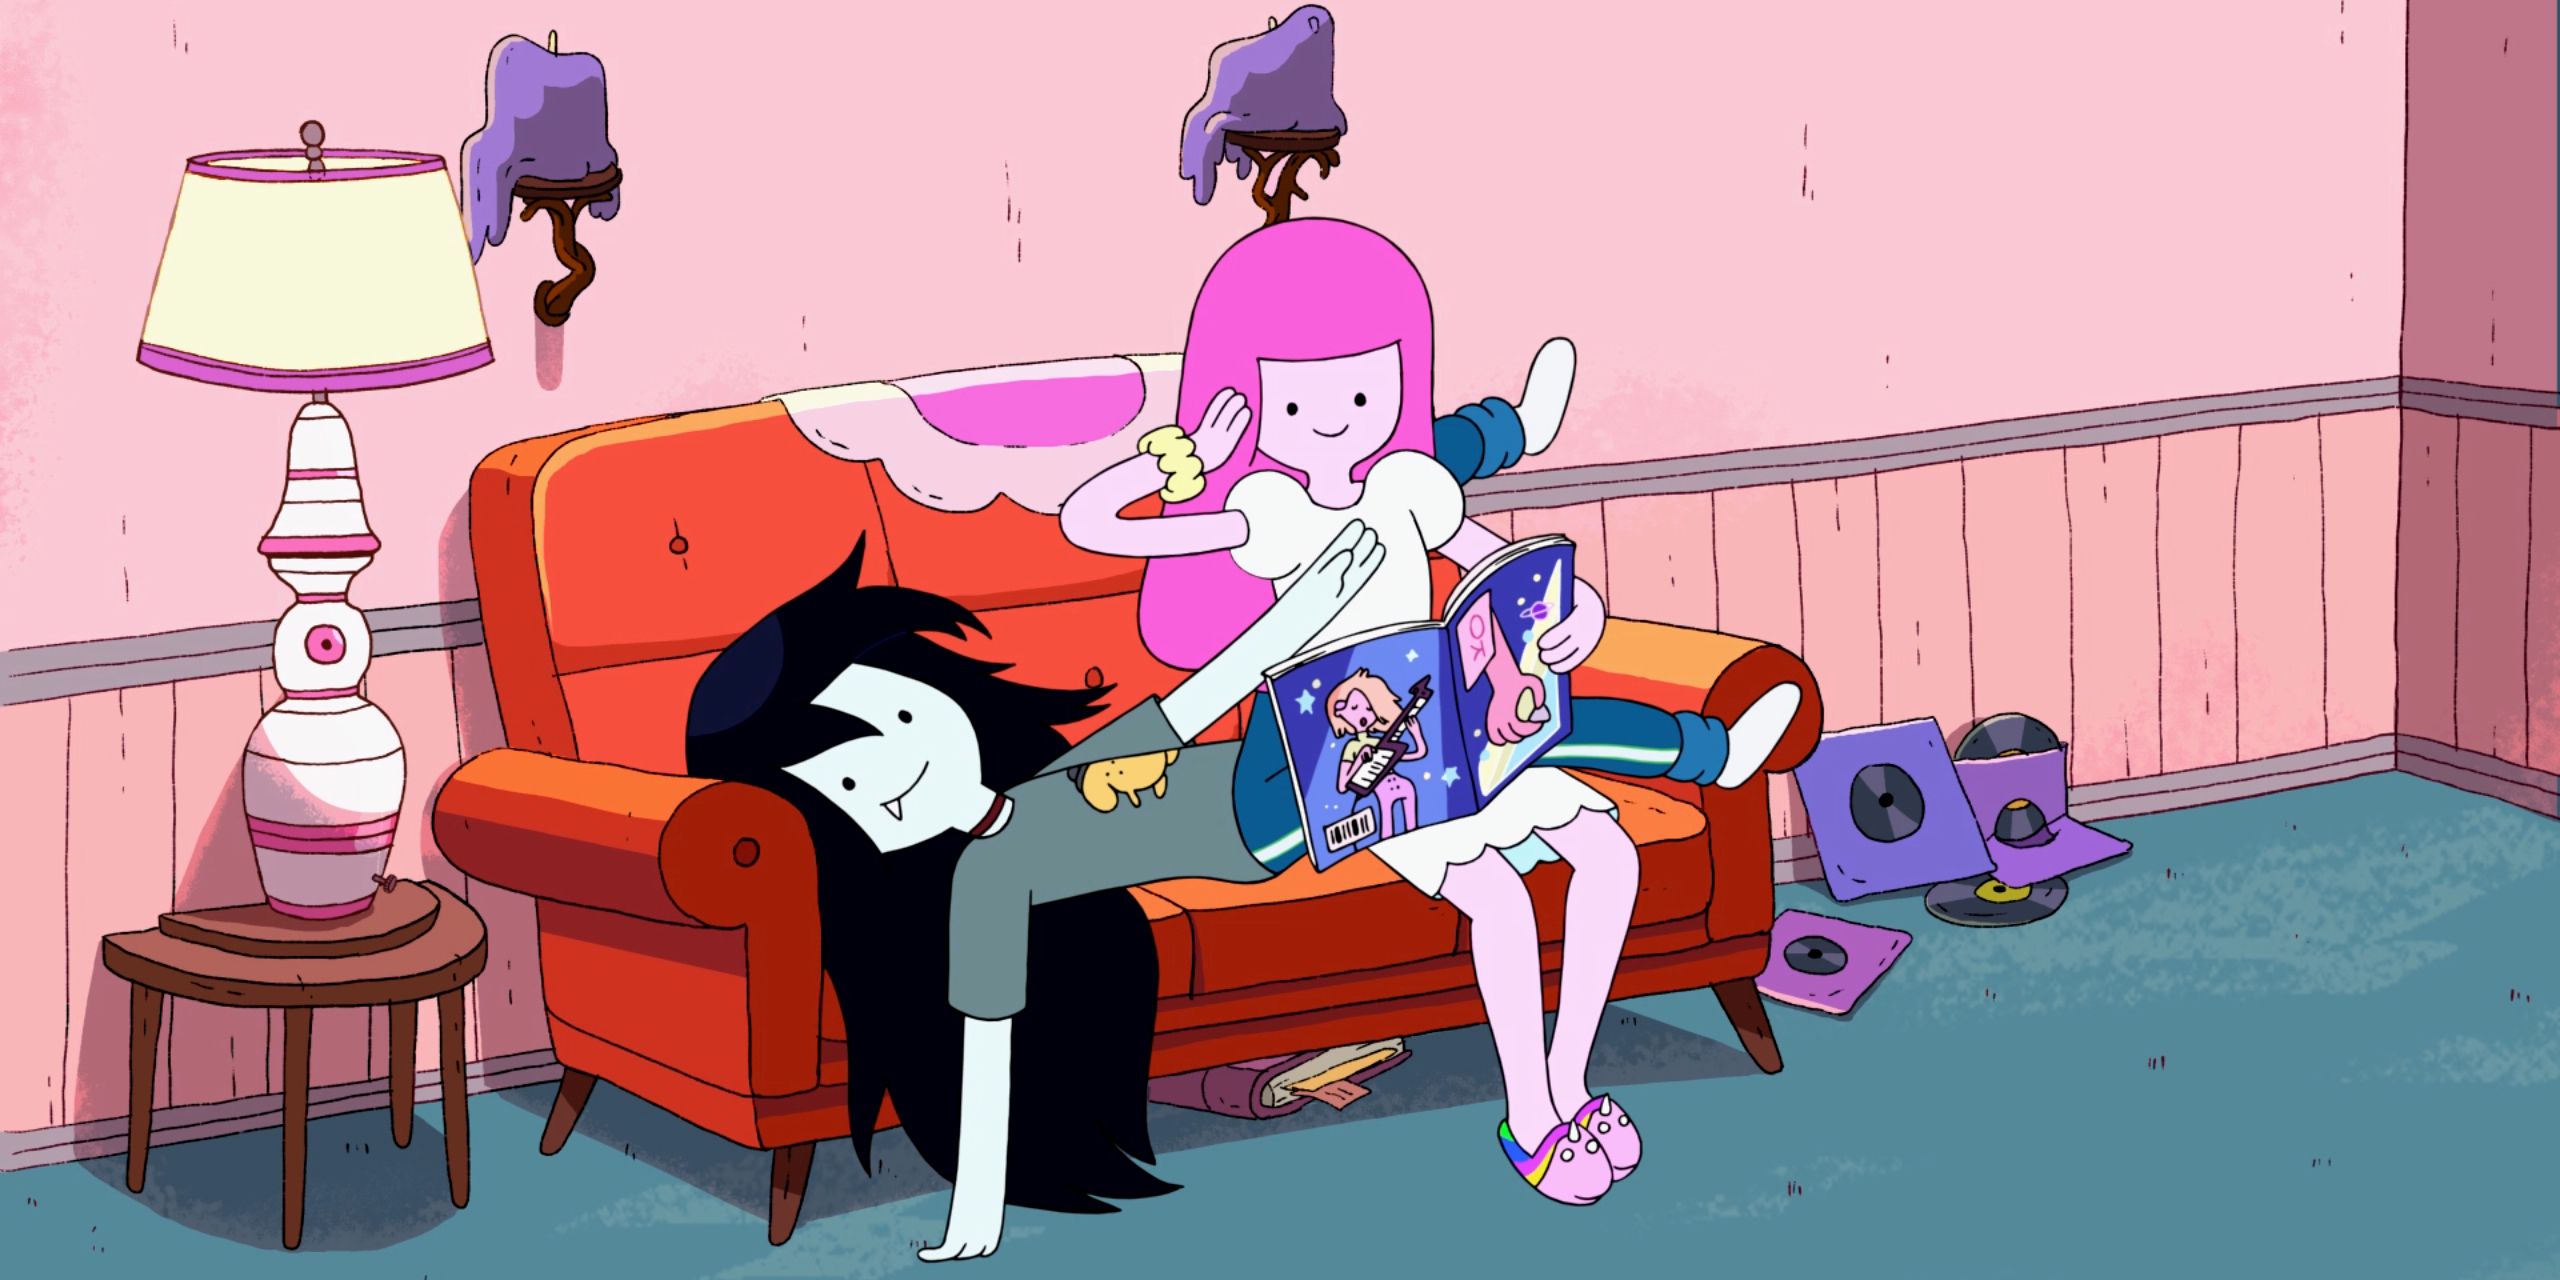 Marceline and Bonnibel relaxing on a couch